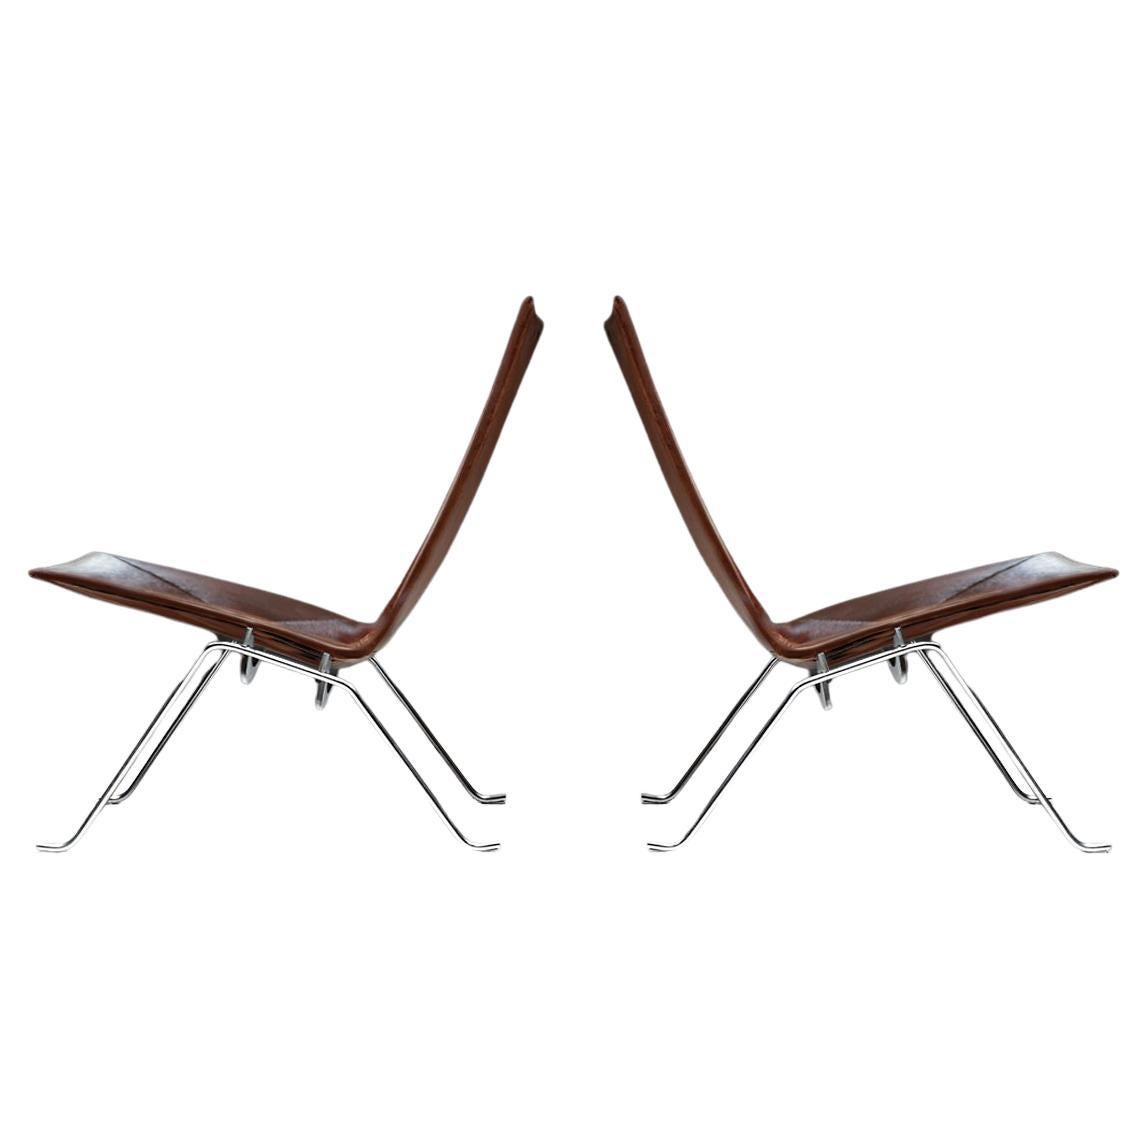 Pair of Poul Kjaerholm, E. Kold Christensen Steel and Leather PK22 Lounge Chairs